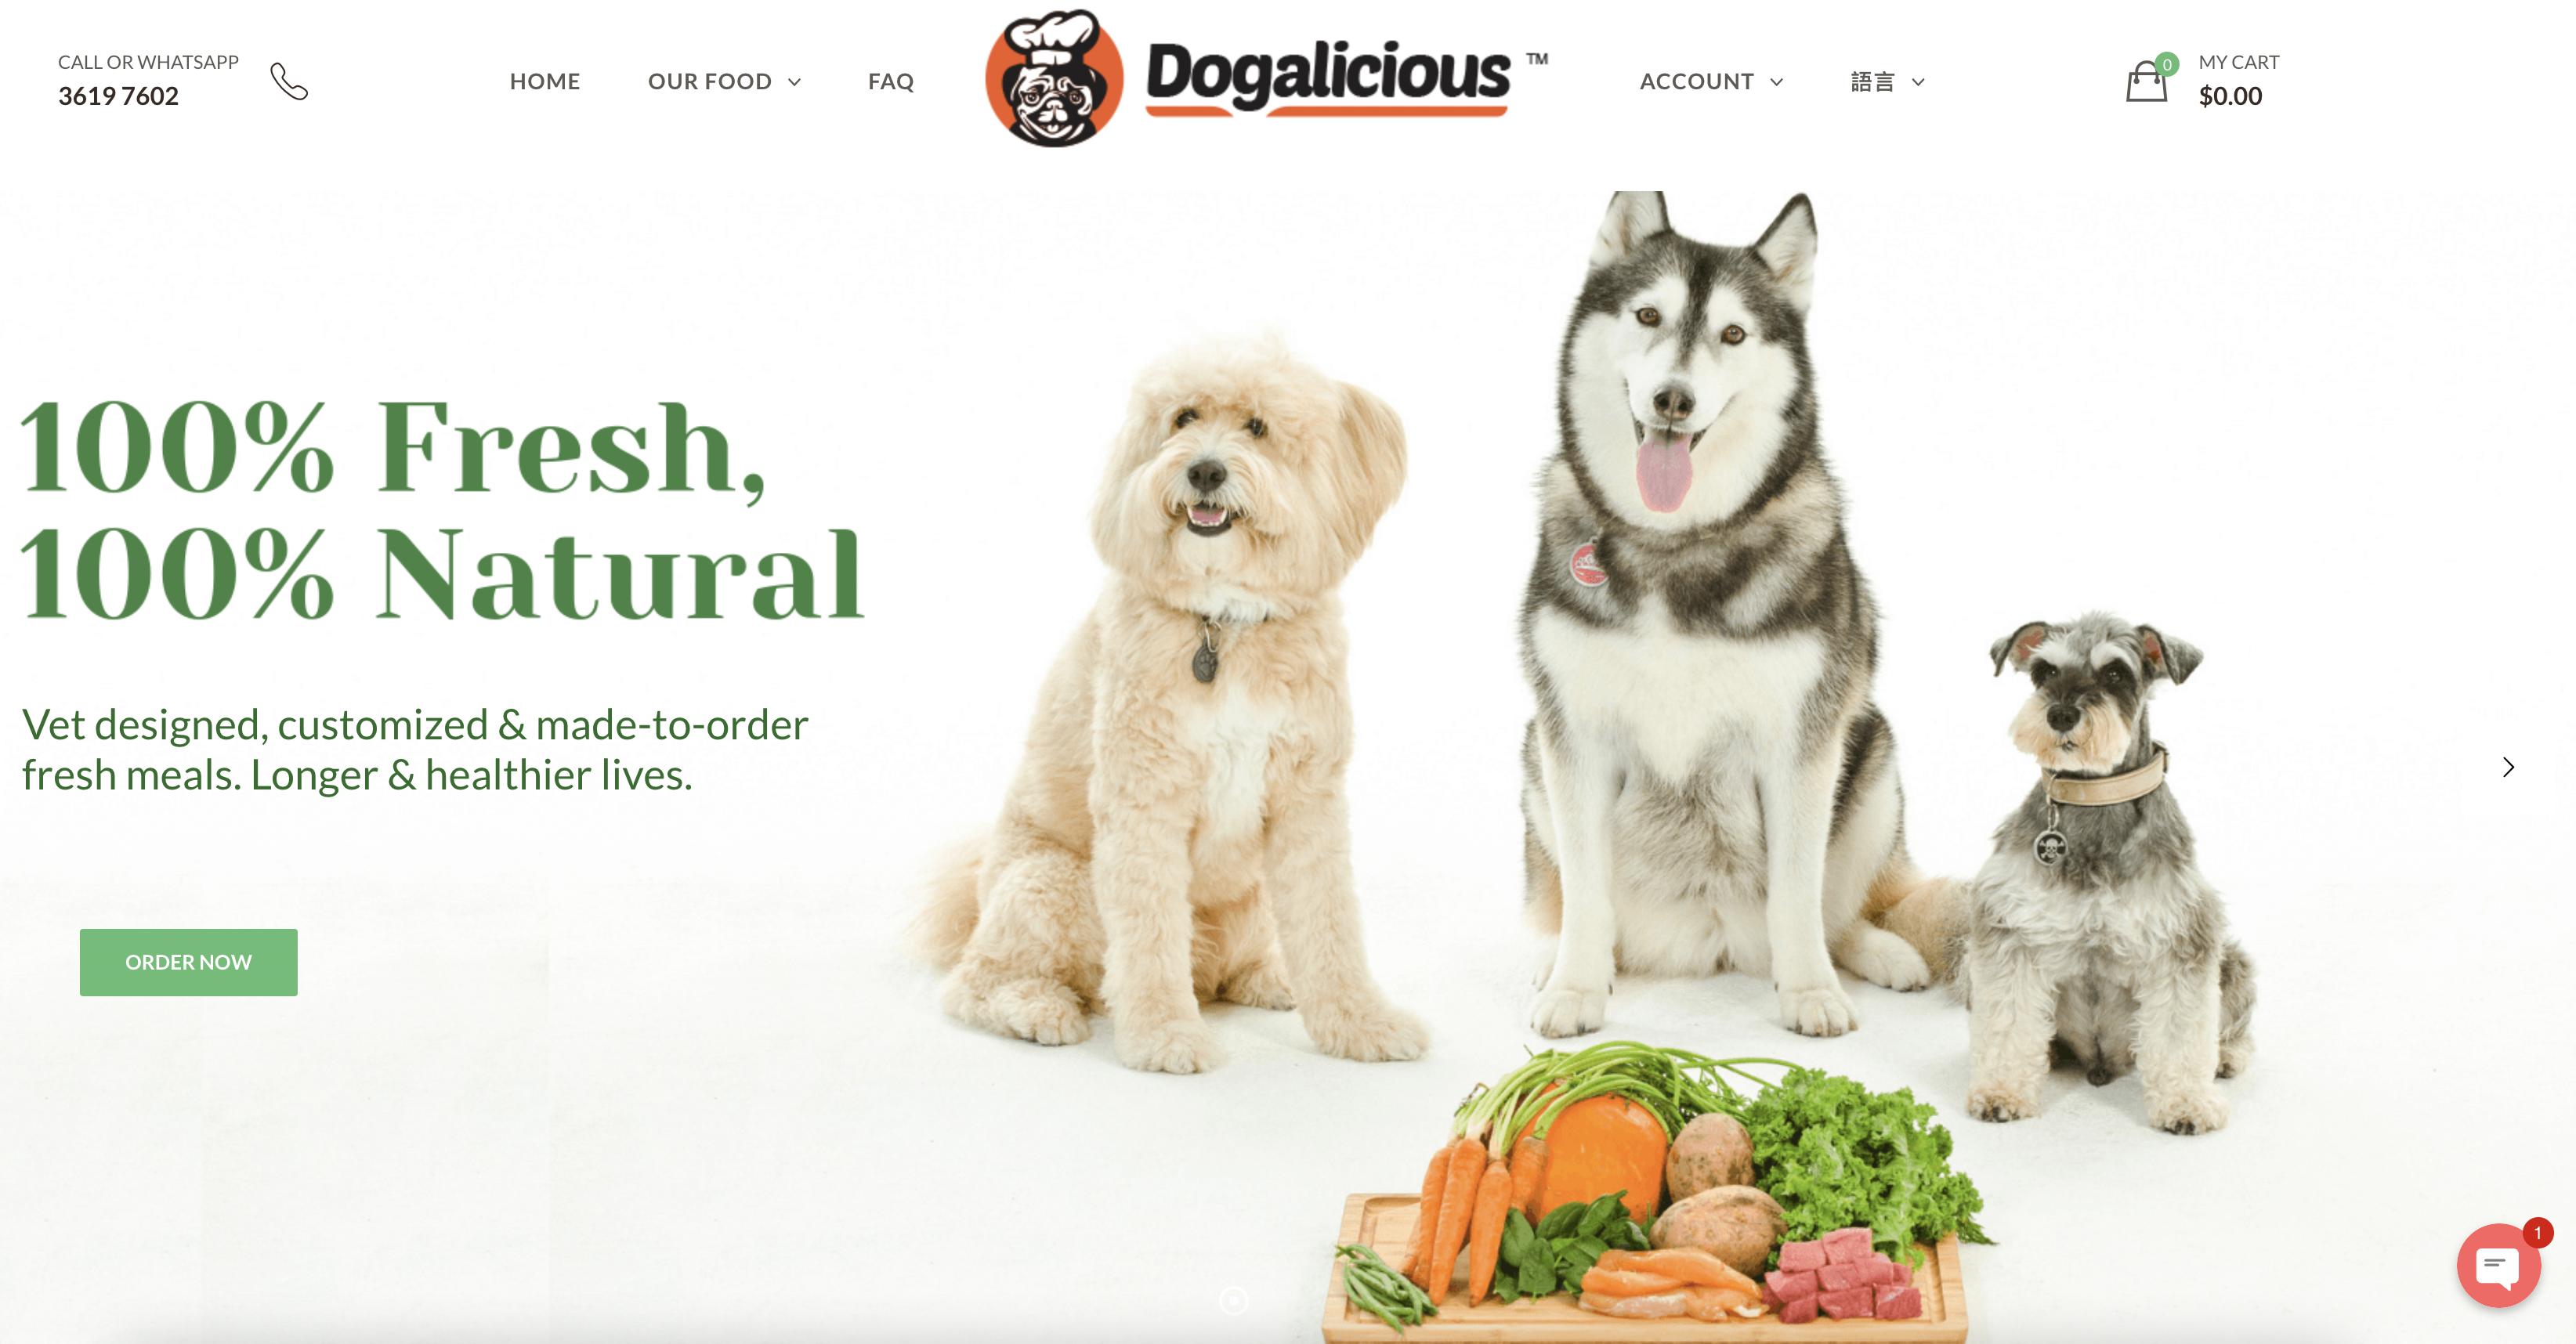 Dogalicious is dog food delivery system created by Entro Solutions